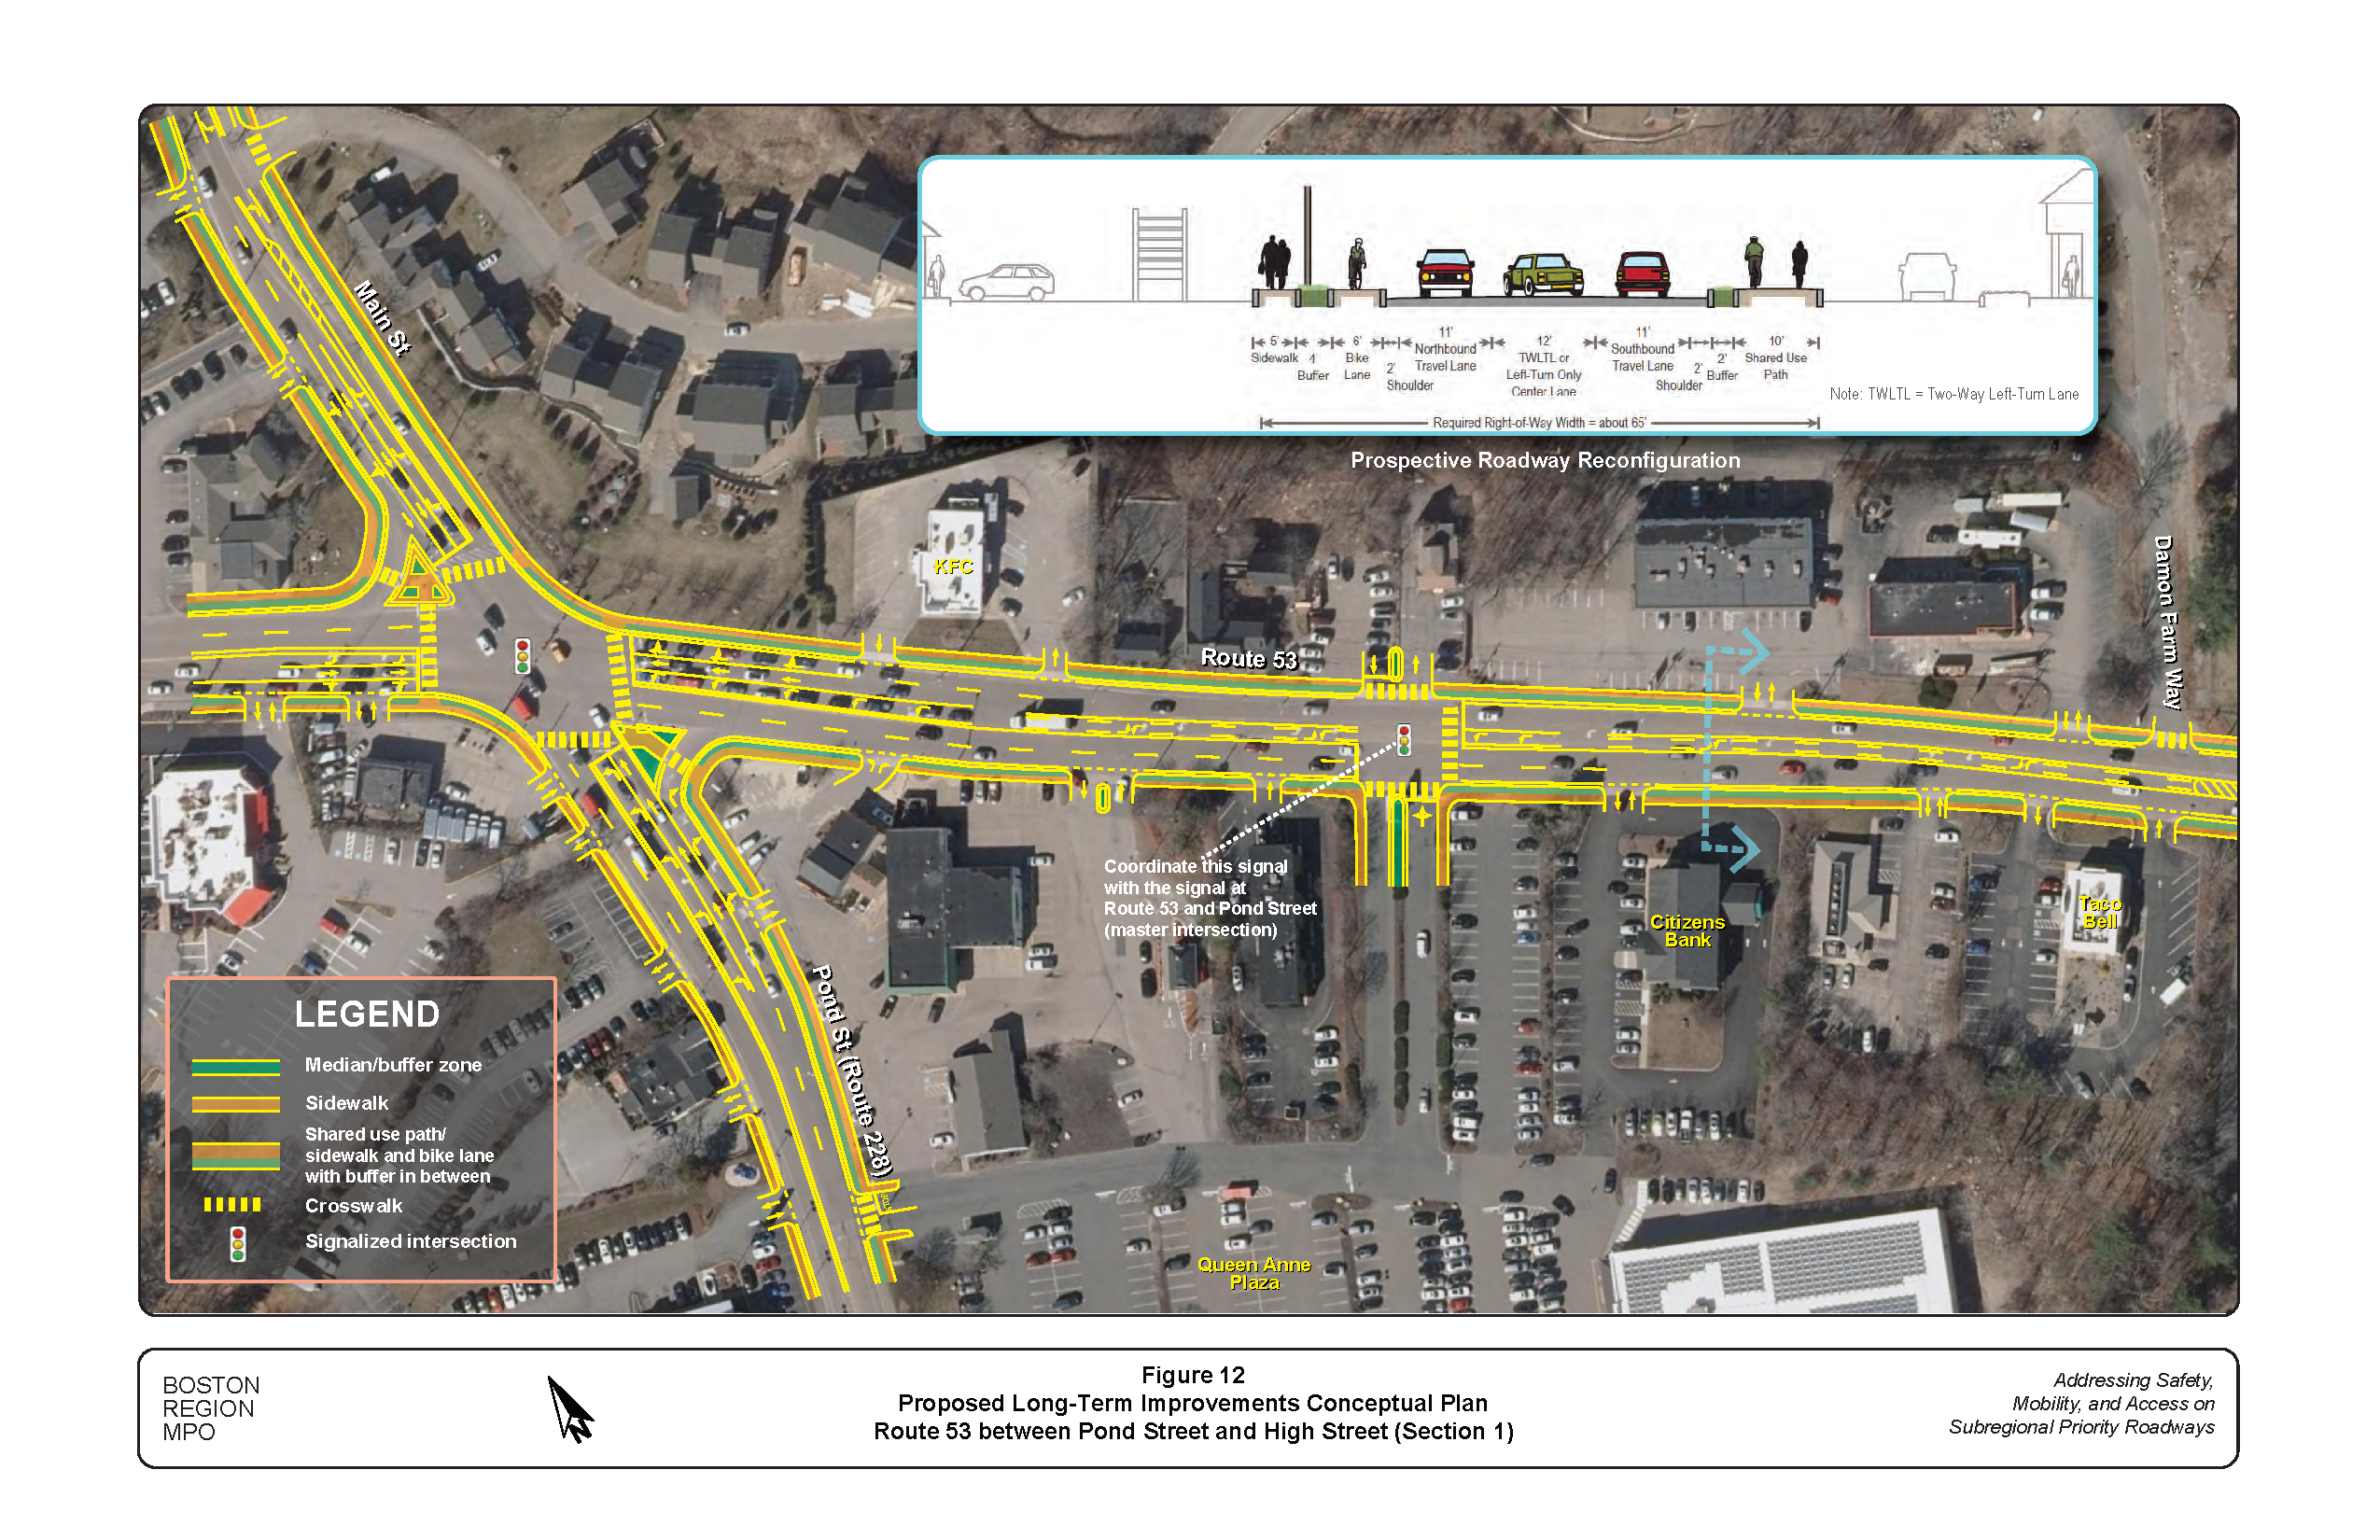 This figure shows a conceptual plan of the proposed long-term improvements in the Route 53 section from Pond Street to Demon Farm Way.